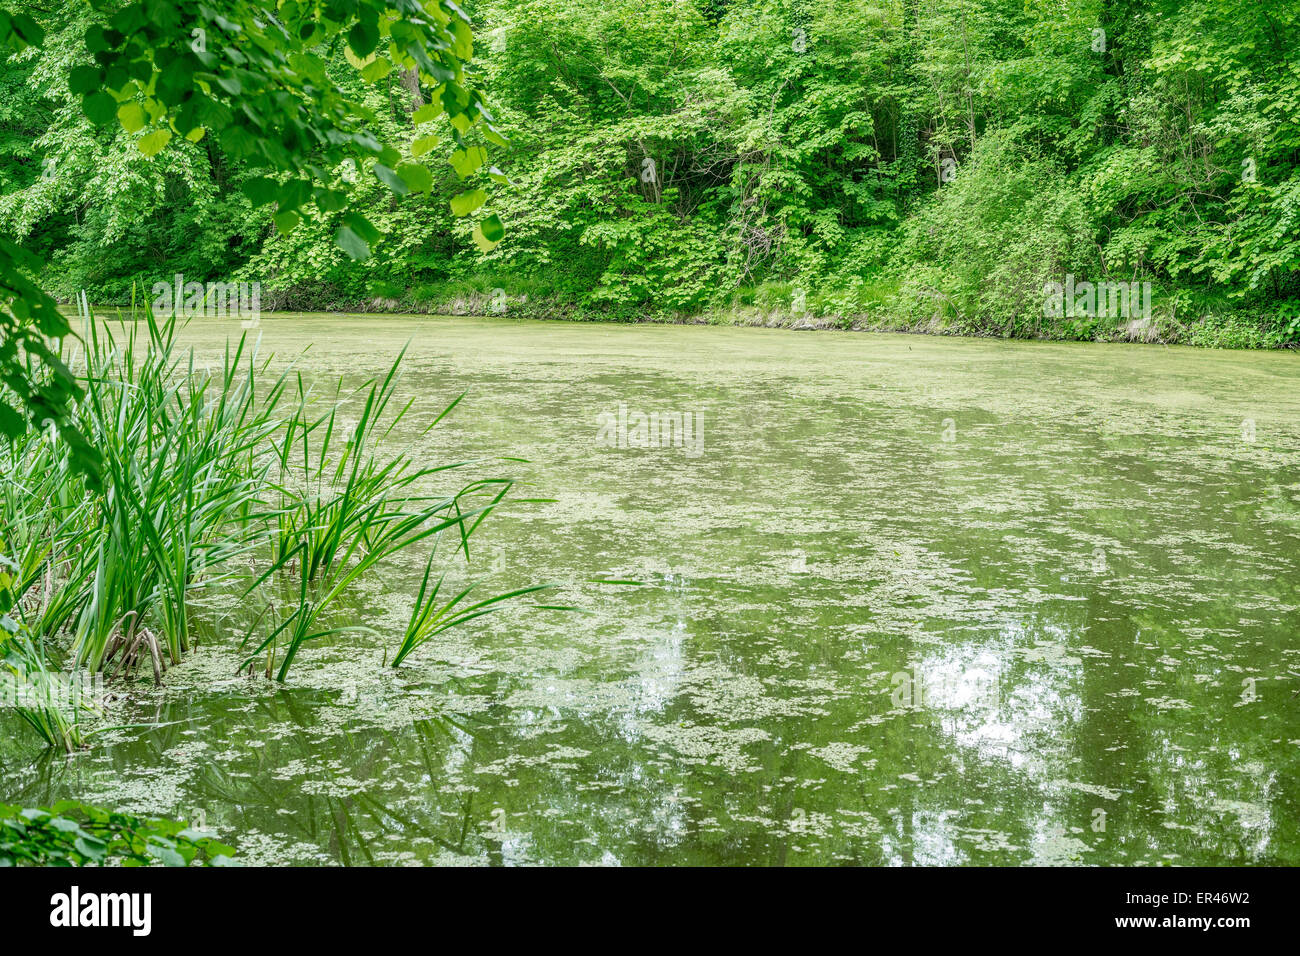 Pond covered with duckweed surrounded by lush greenery Stock Photo